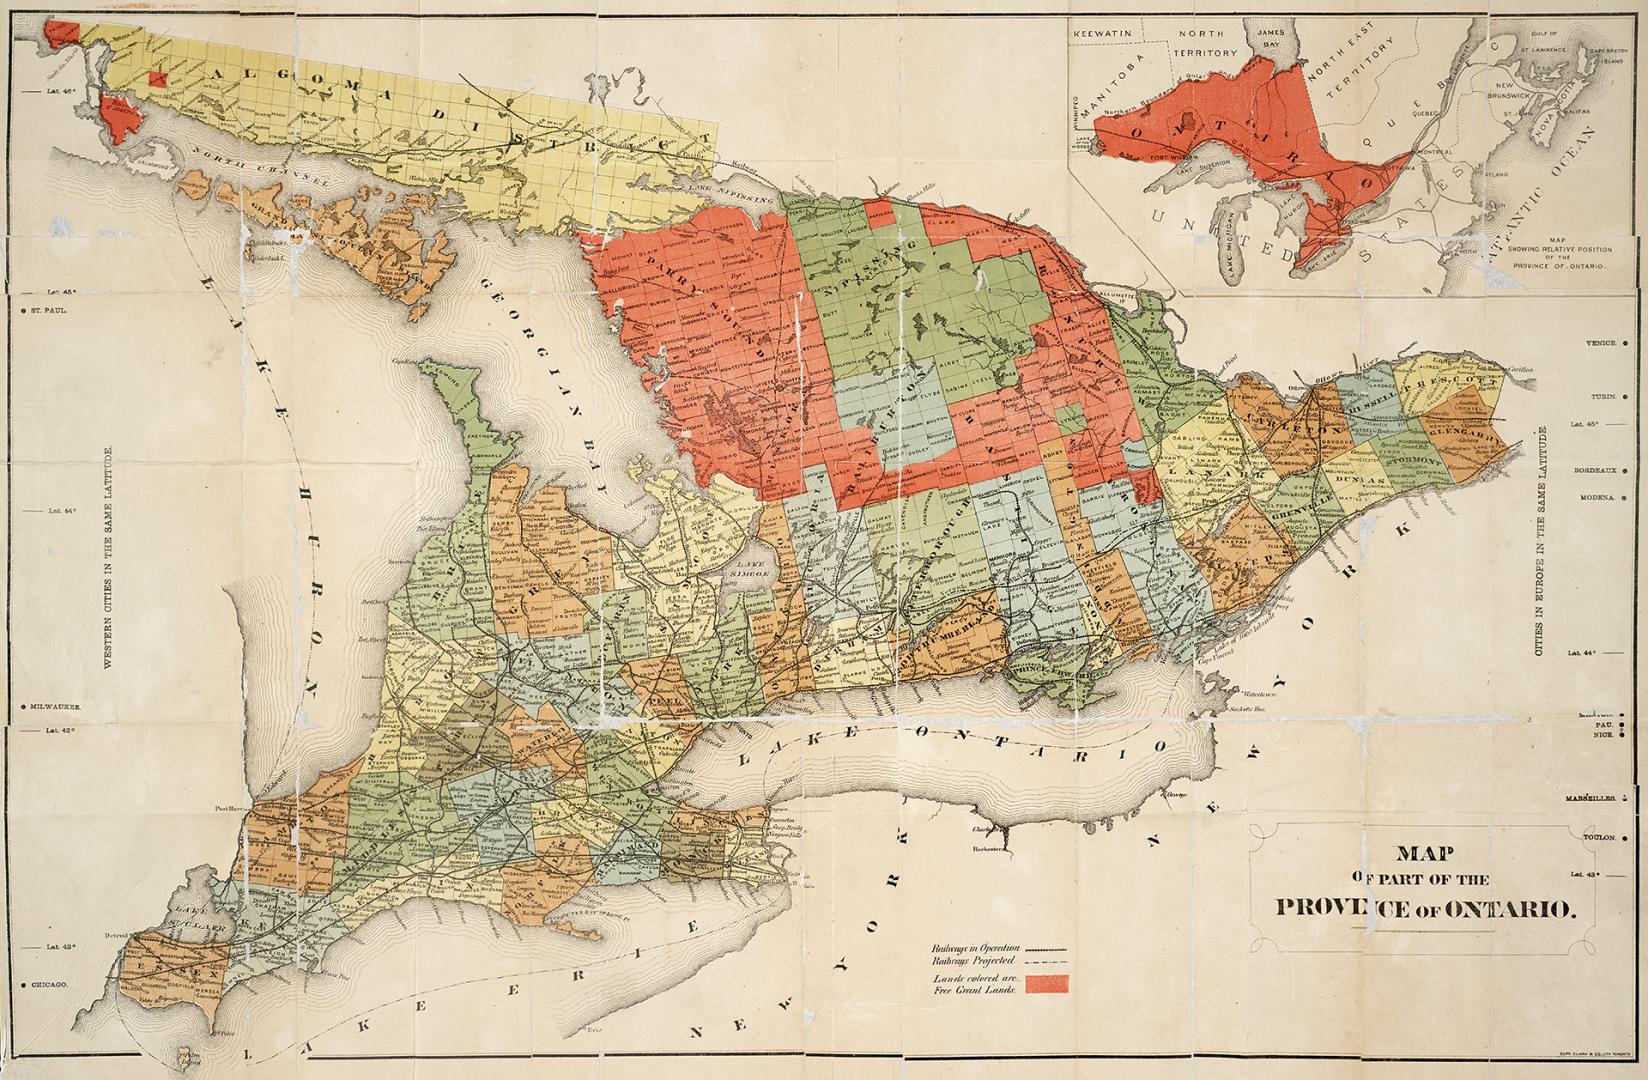 Map of part of the province of Ontario